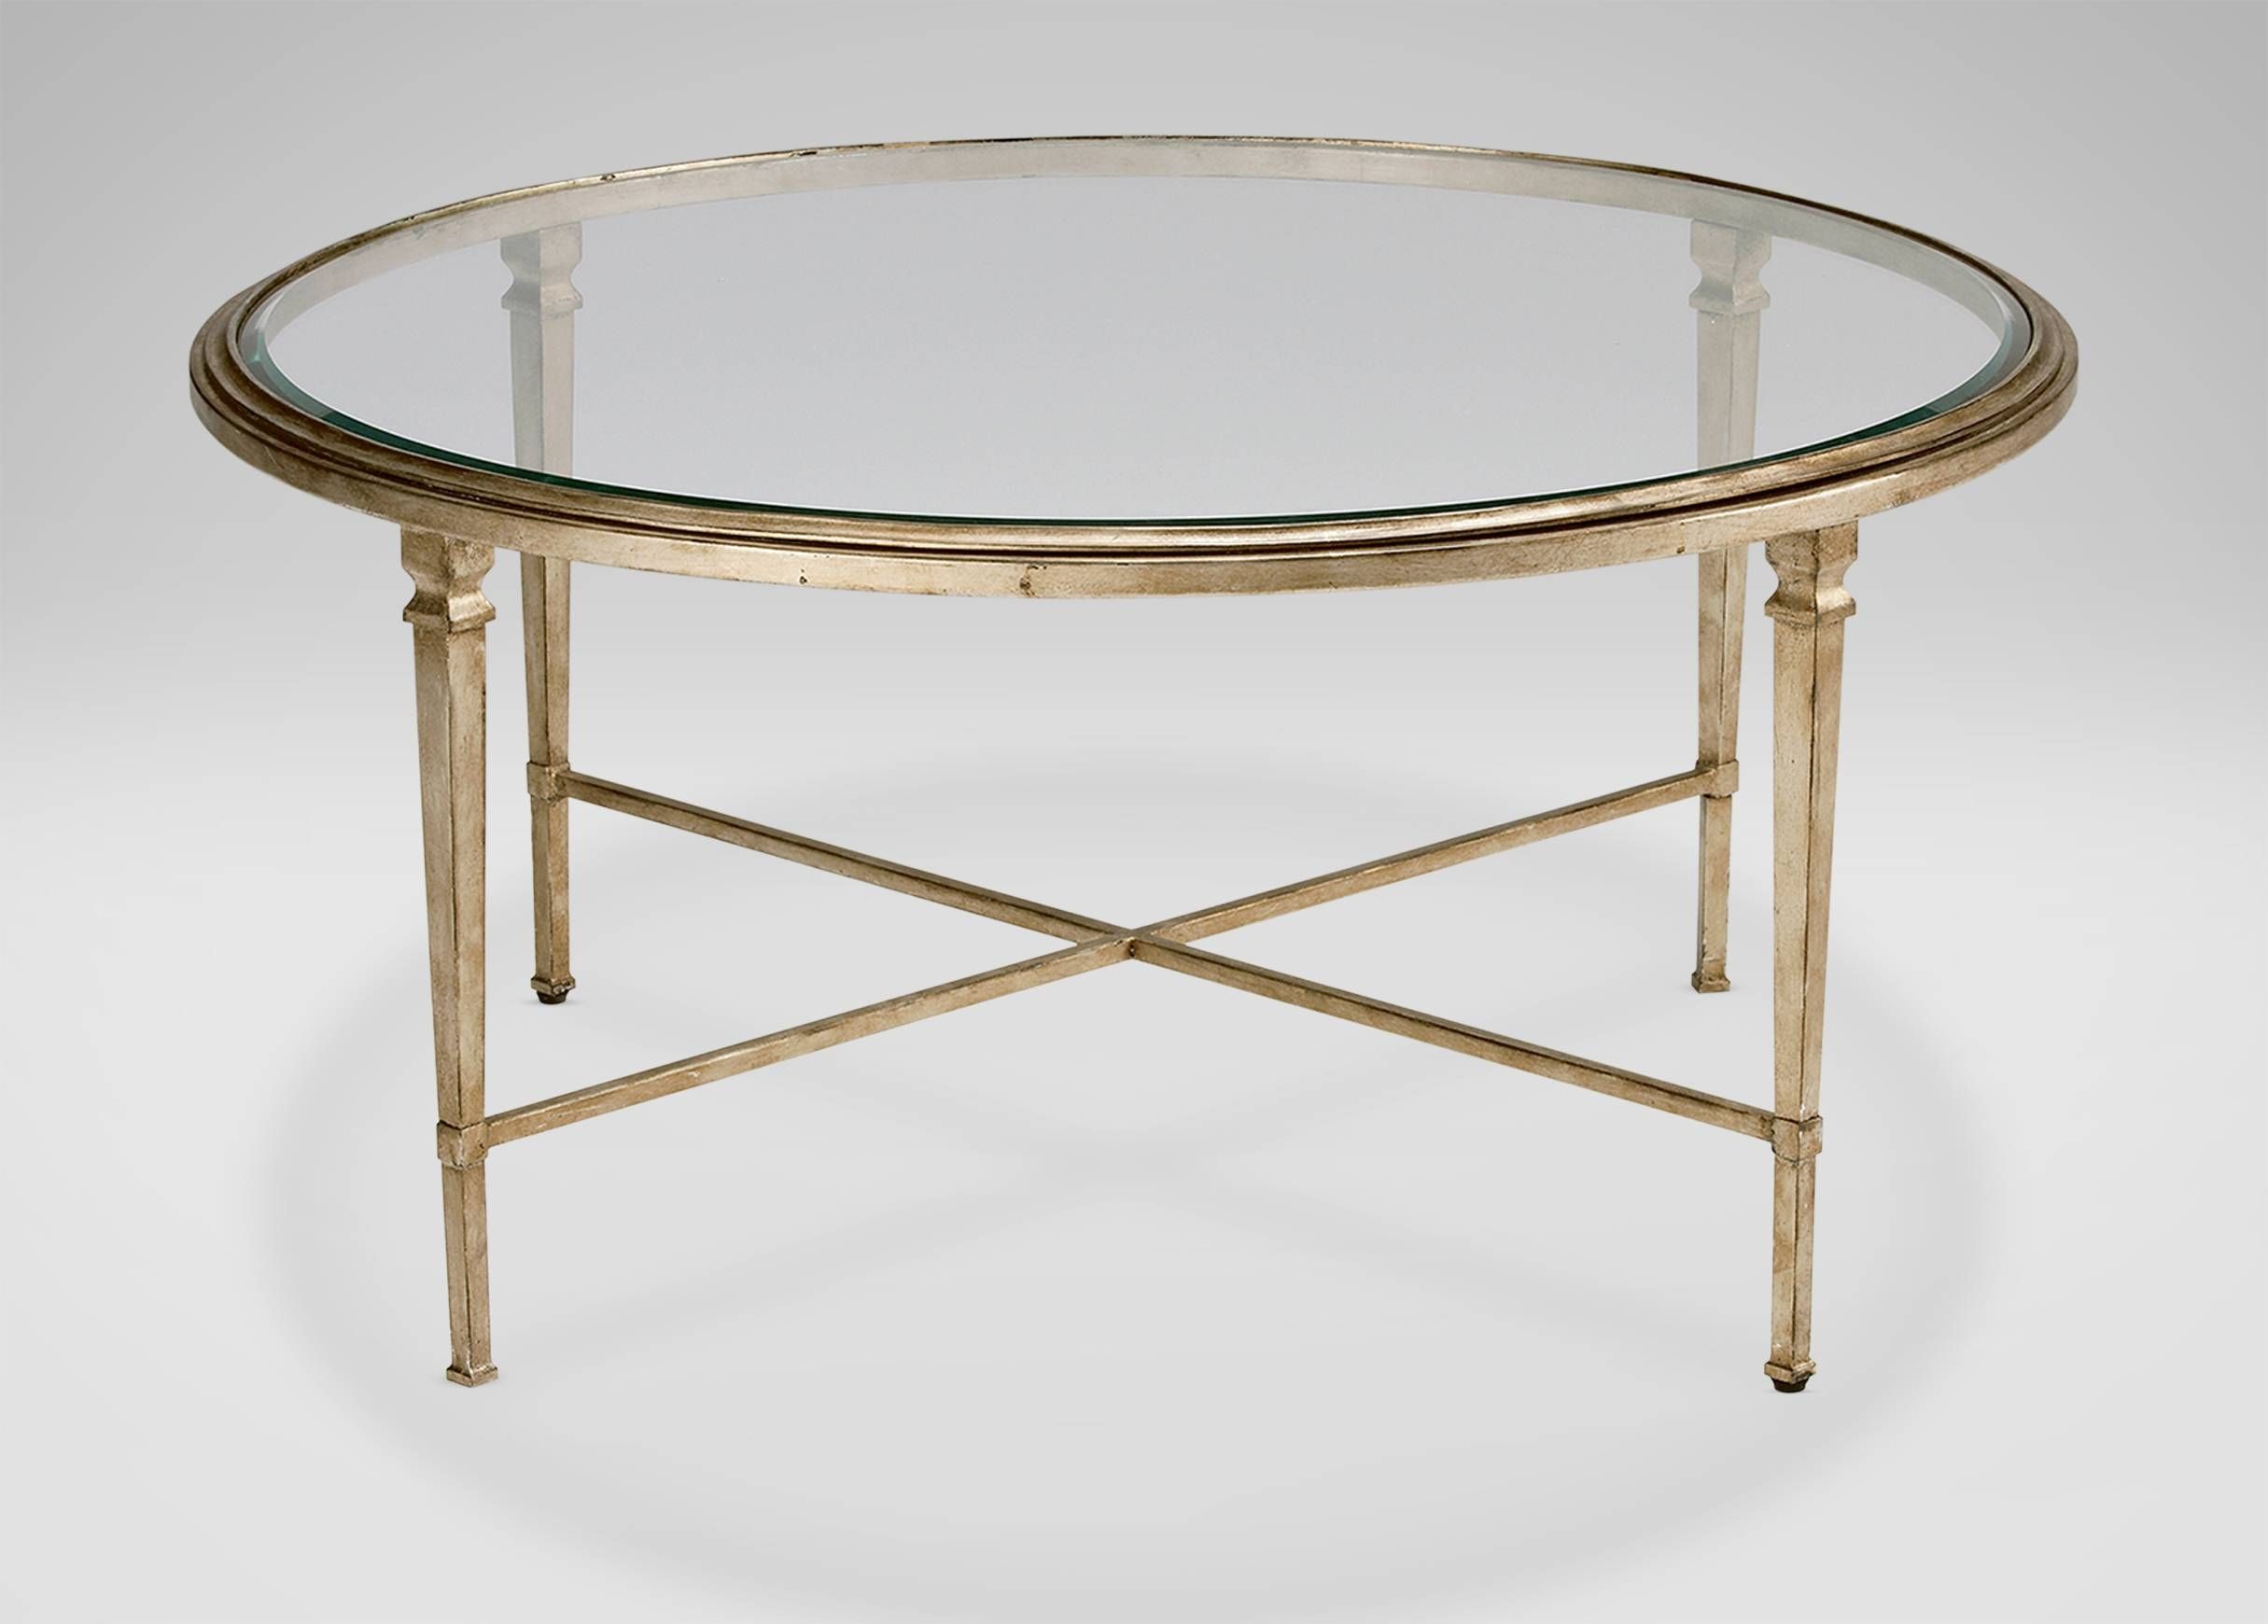 30 Inch Round Glass Top Coffee Table | Coffee Tables Decoration Intended For Circular Glass Coffee Tables (Photo 29 of 30)